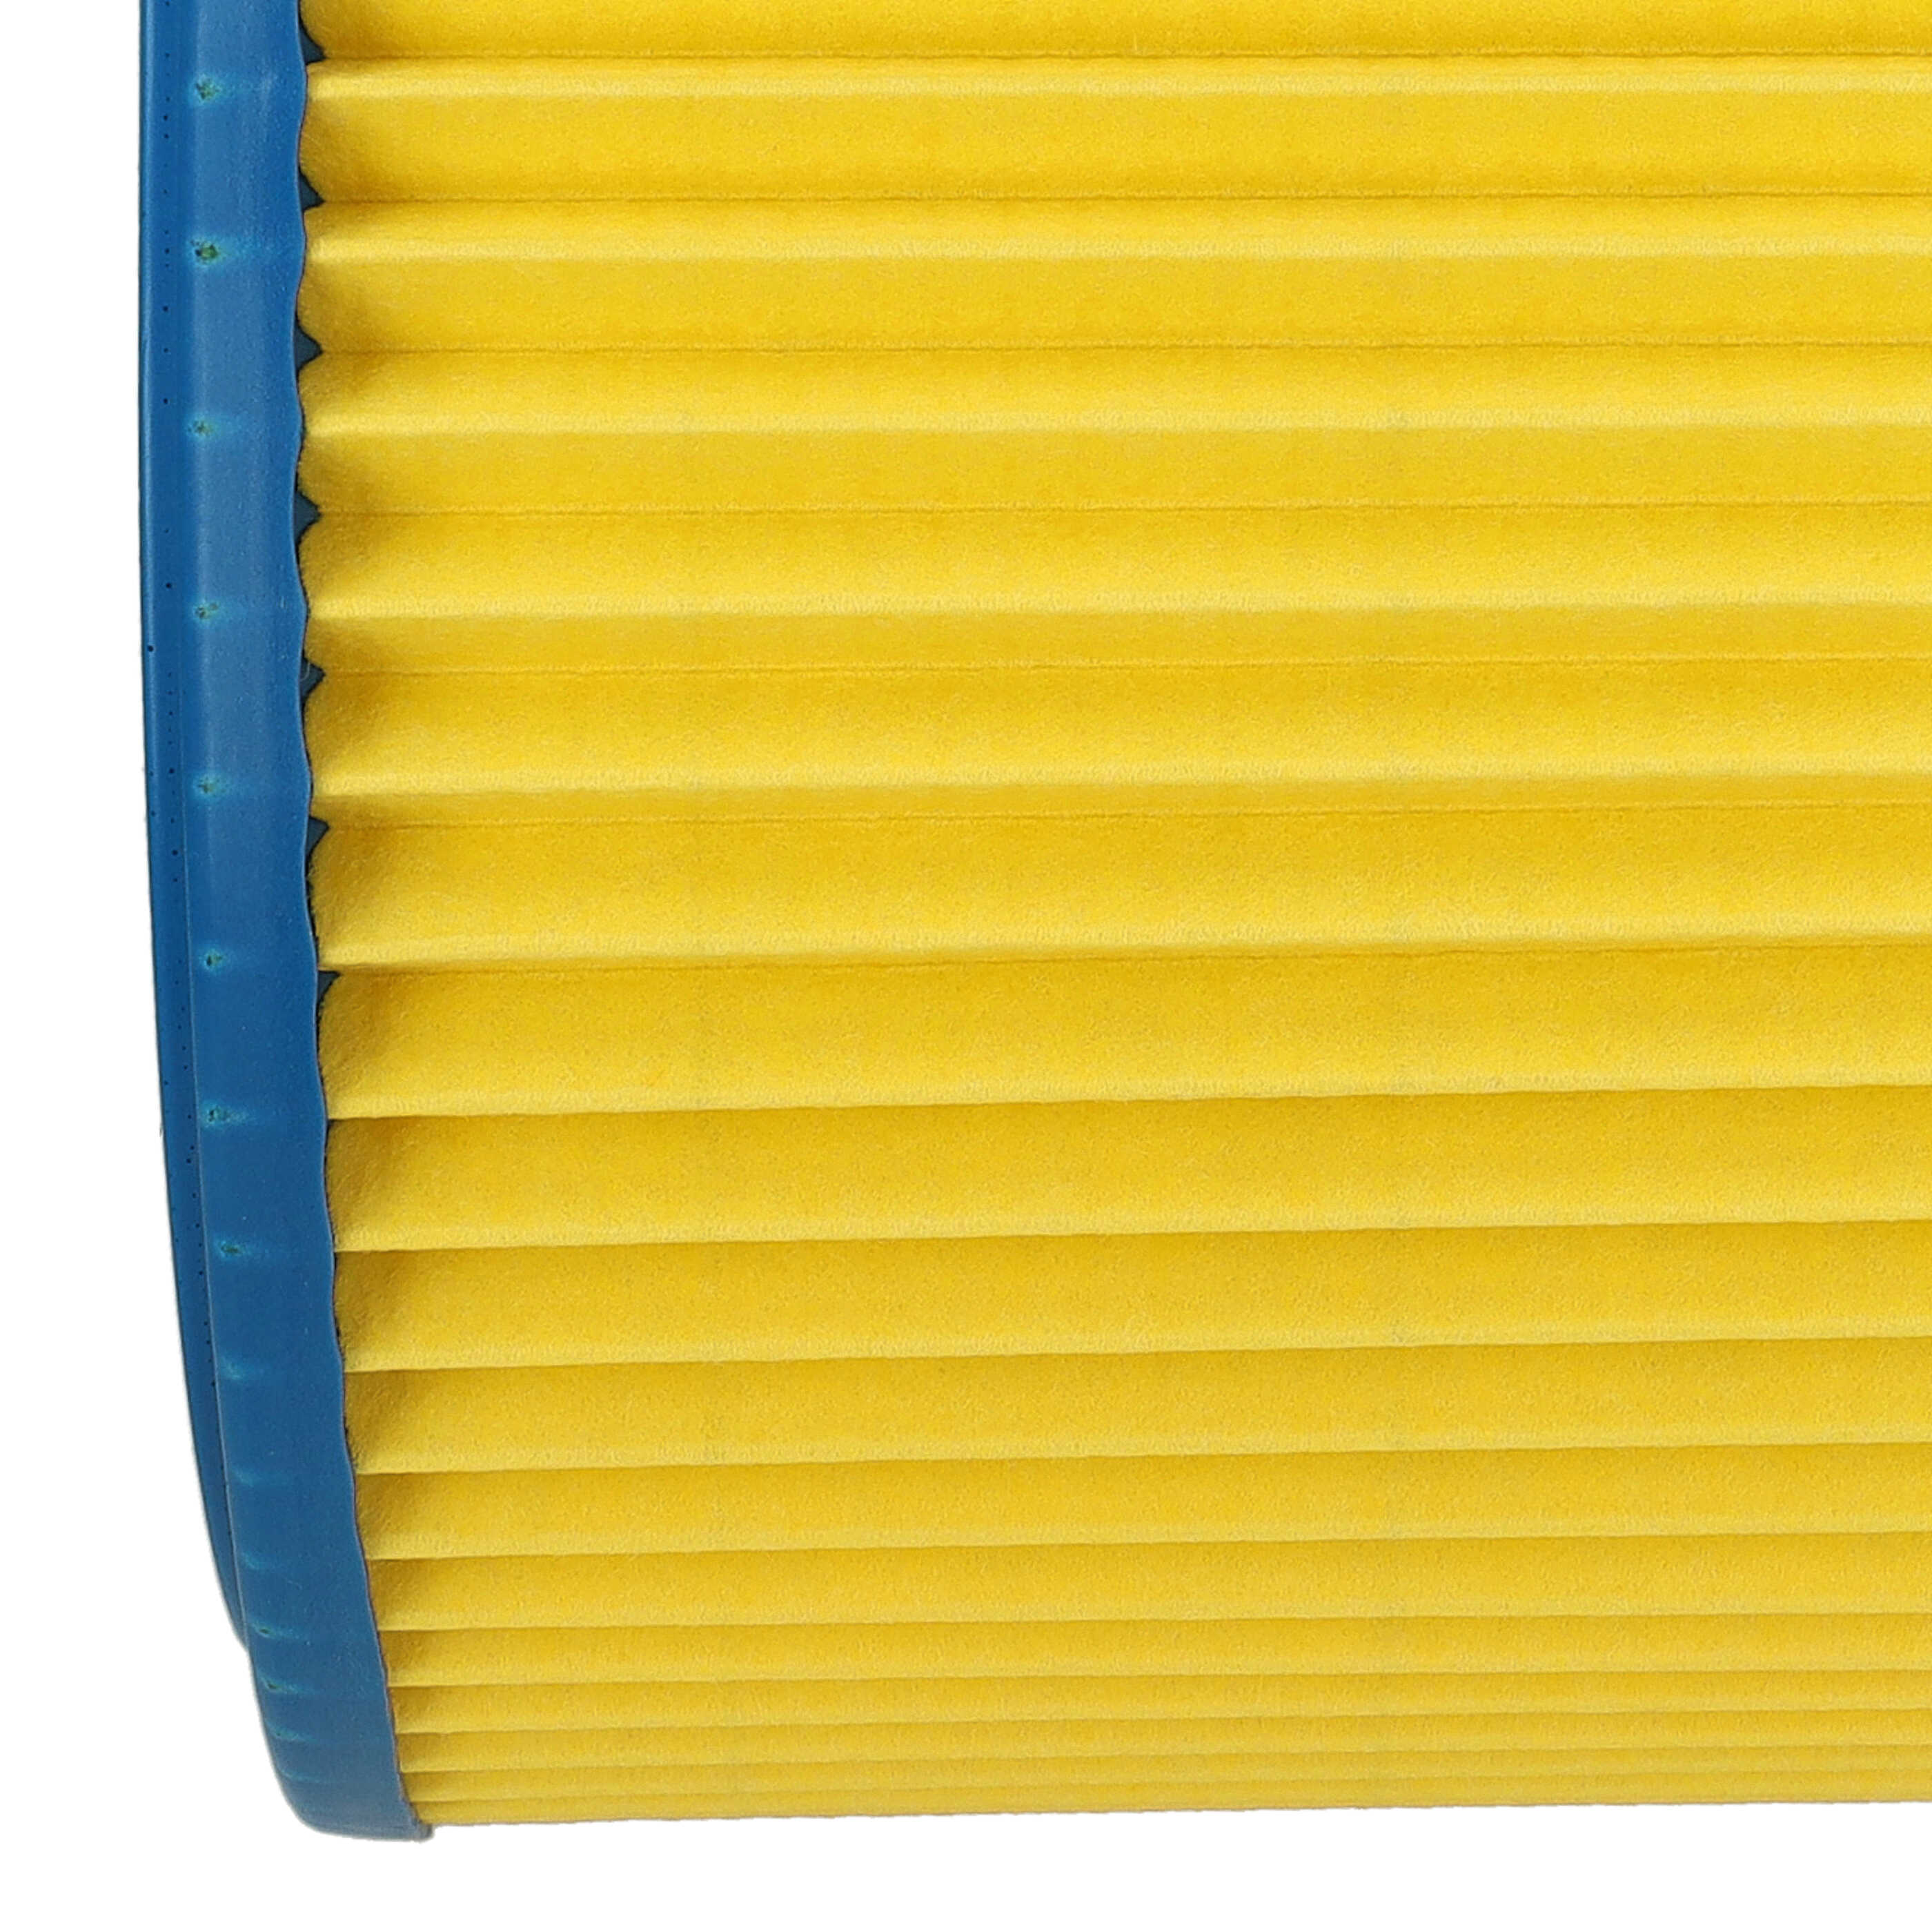 1x cartridge filter replaces Einhell 2351110 for LIV Vacuum Cleaner, blue / yellow